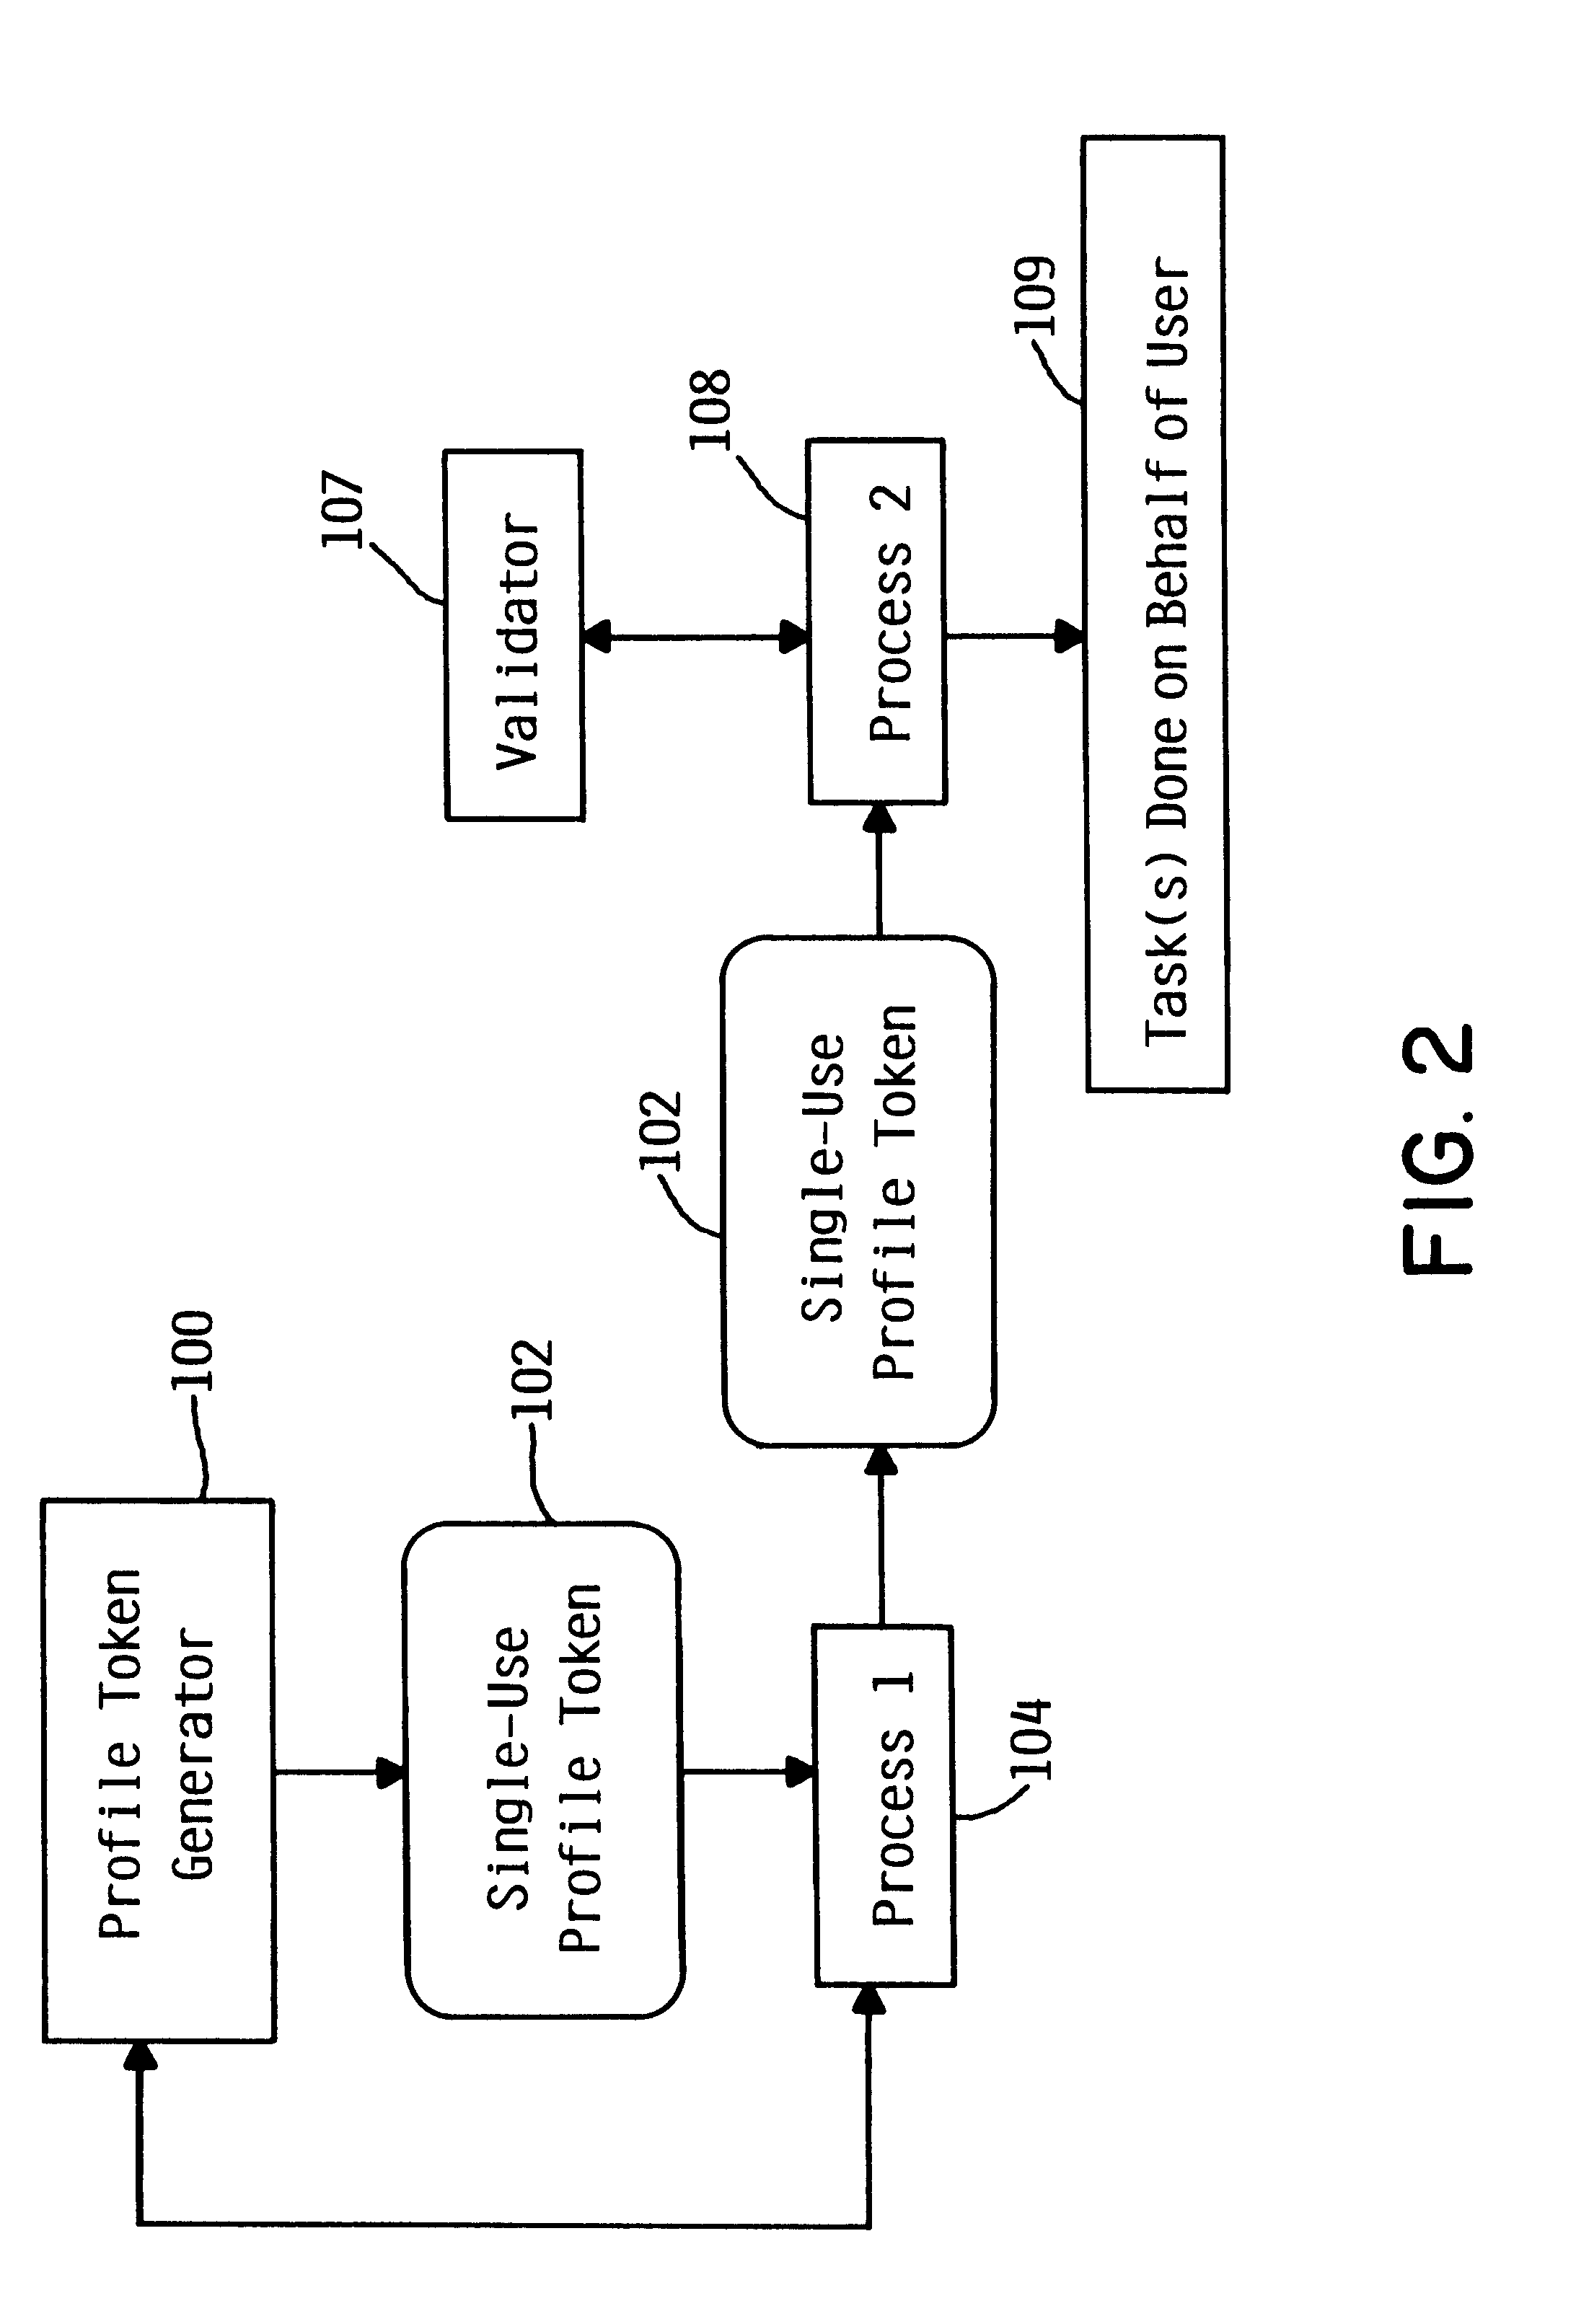 User authentication system and method for multiple process applications